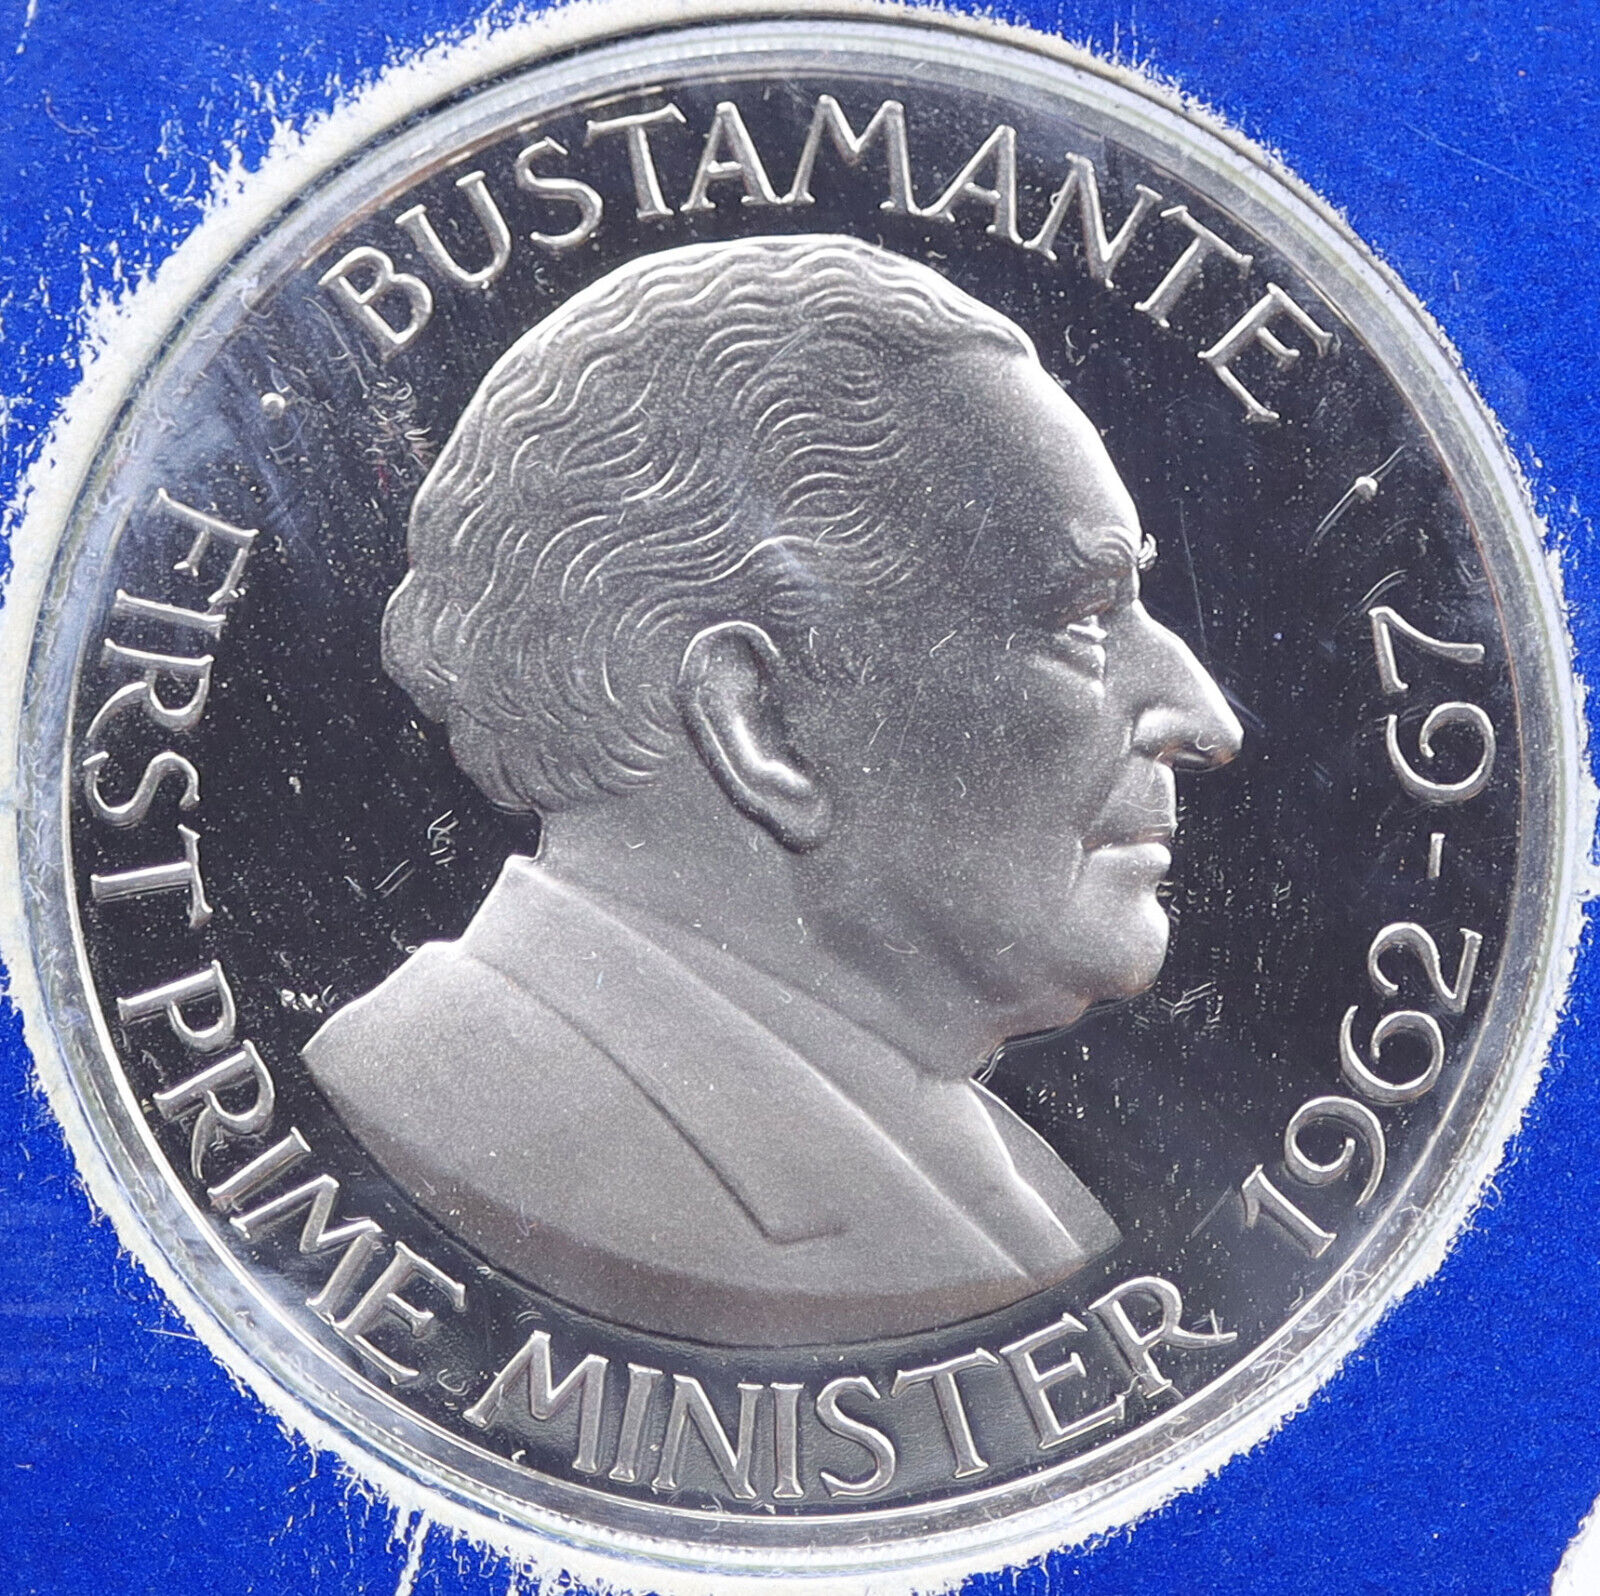 1975 JAMAICA First Prime Minister BUSTAMANTE Vintage Proof Dollar Coin i117767